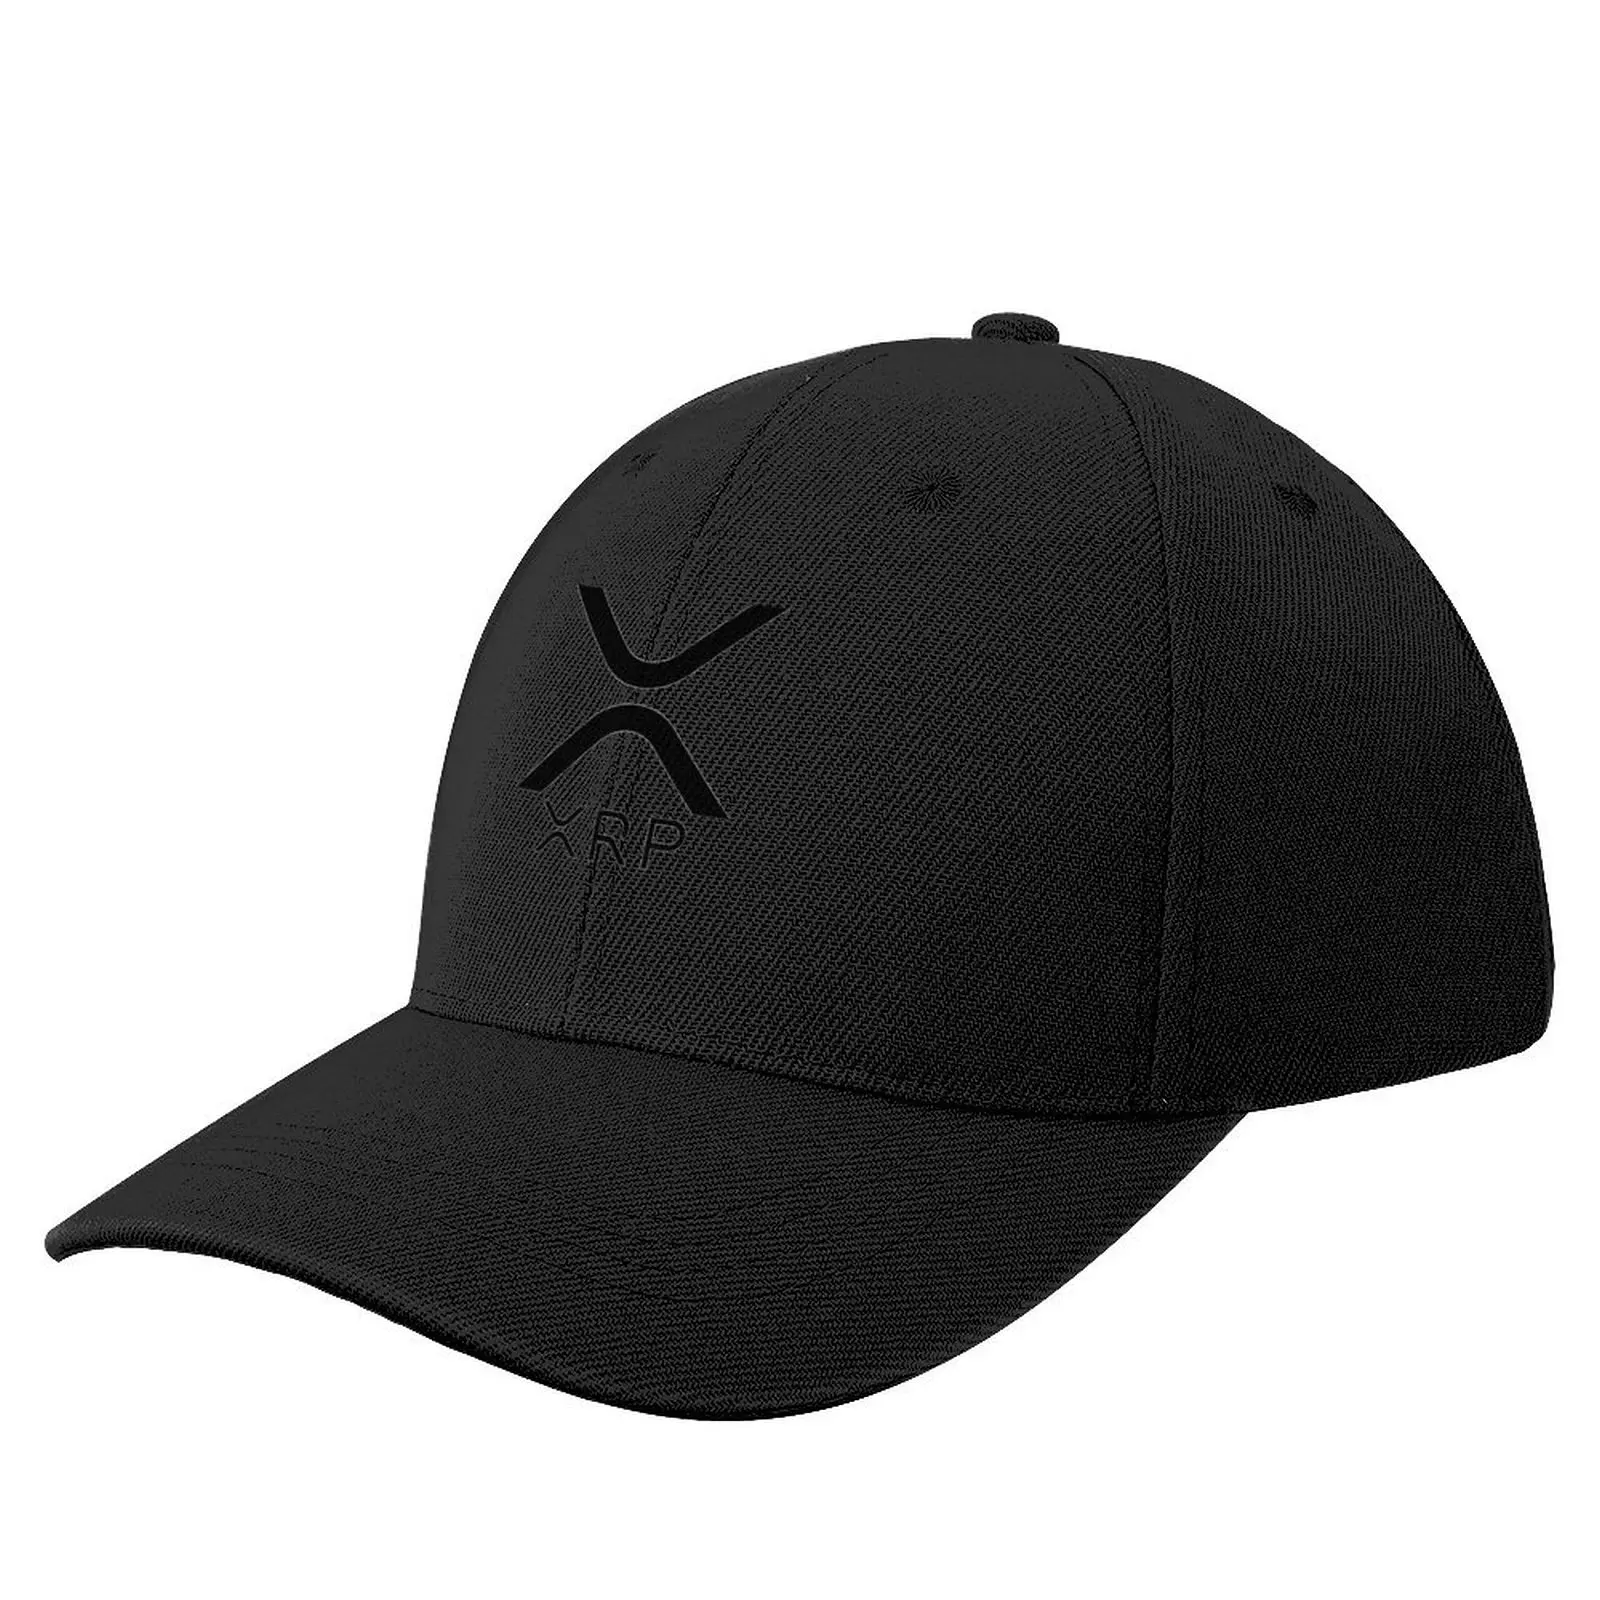 

XRP cryptocurrency - XRP LOGO Baseball Cap Anime Big Size Hat Golf Wear Trucker Hats For Men Women's